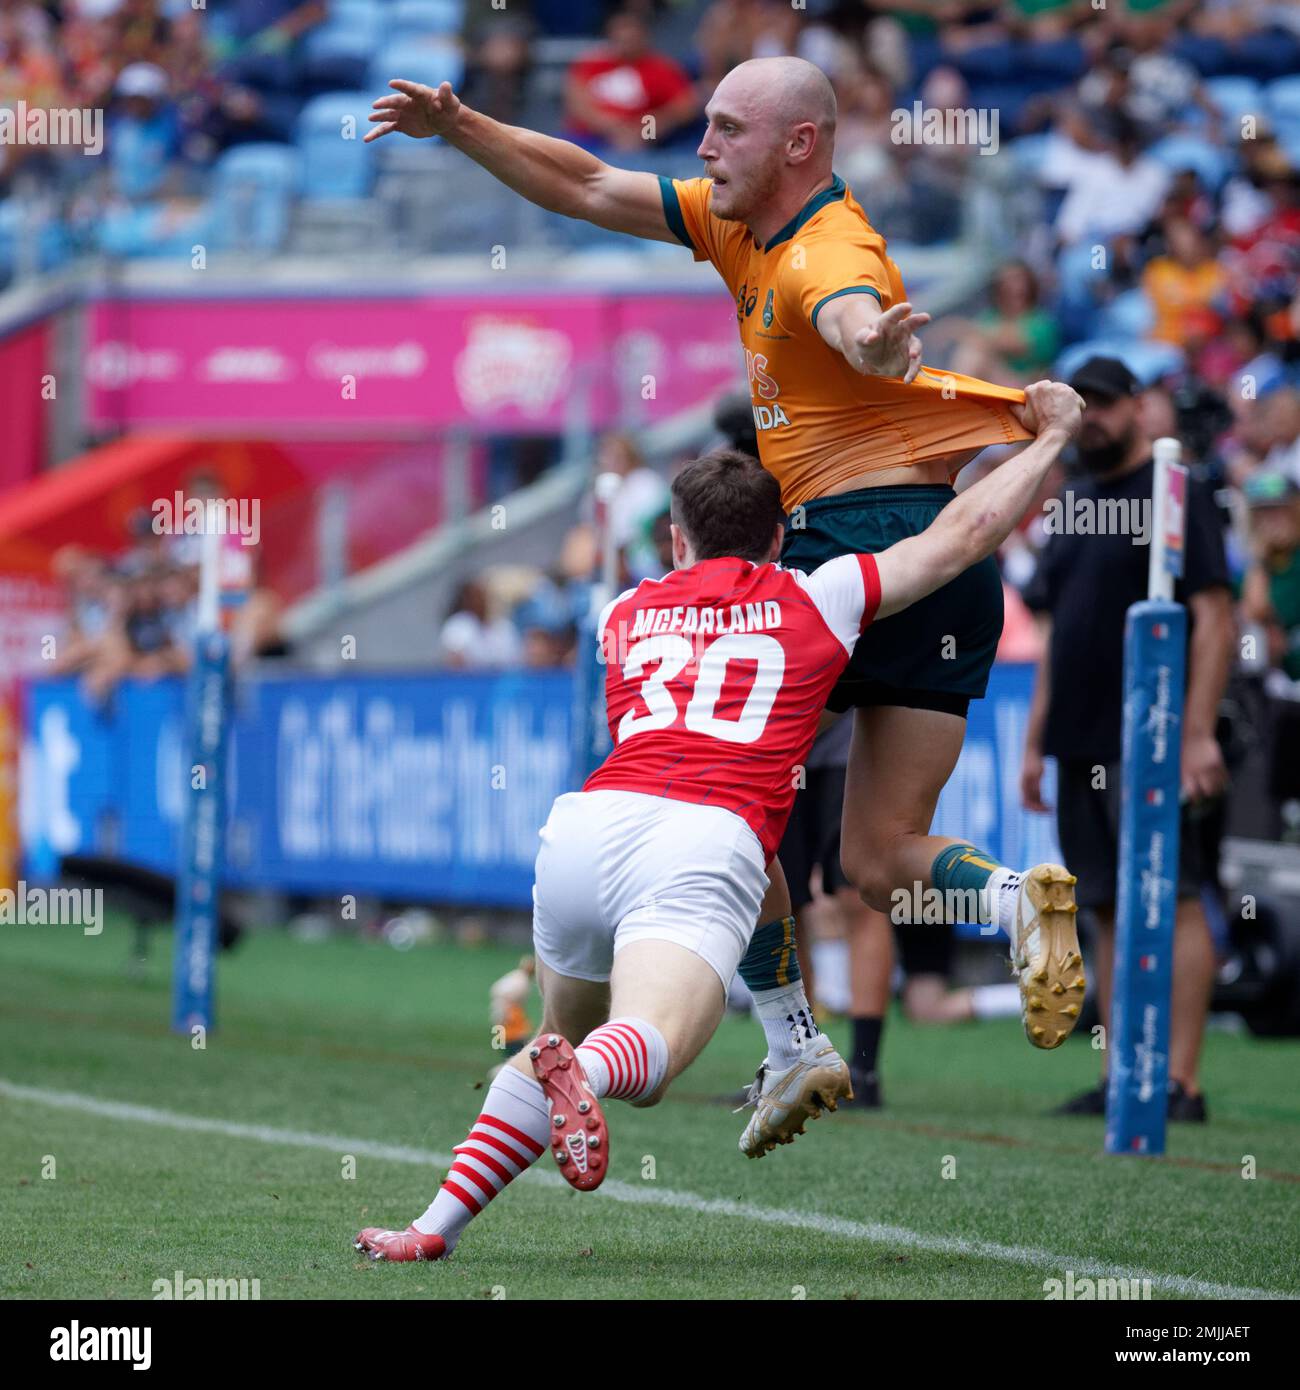 James Turner of Australia is tackled during the 2023 Sydney Sevens match between Australia and Great Britain at Allianz Stadium on January 27, 2023 in Sydney, Australia Stock Photo